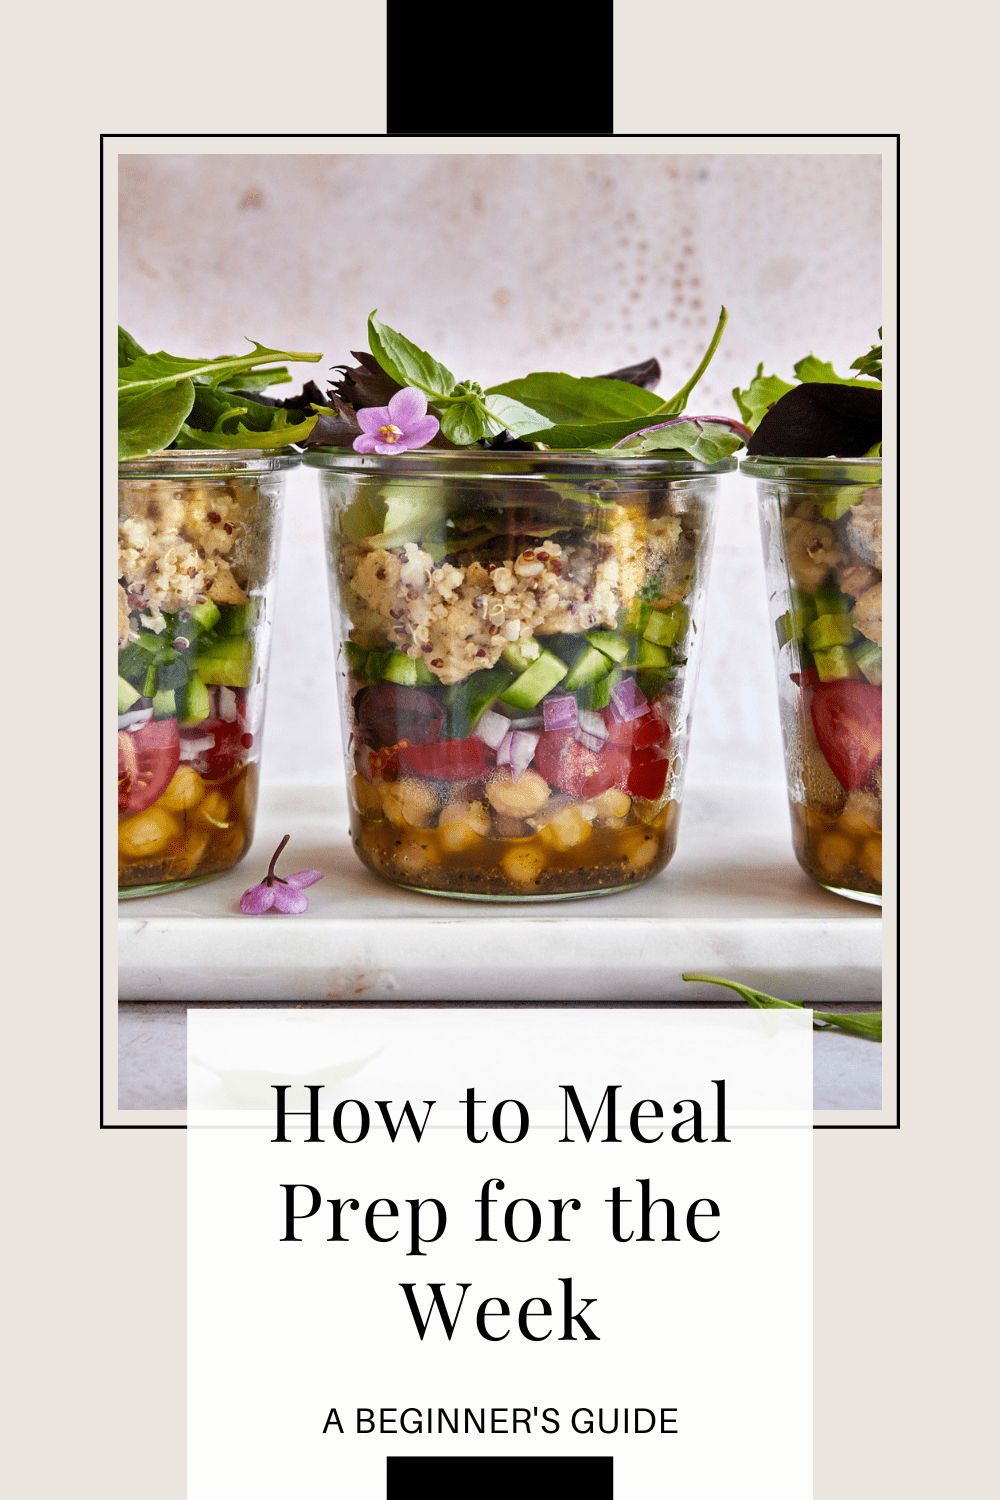 How to Meal Prep for the Week: A Beginner’s Guide